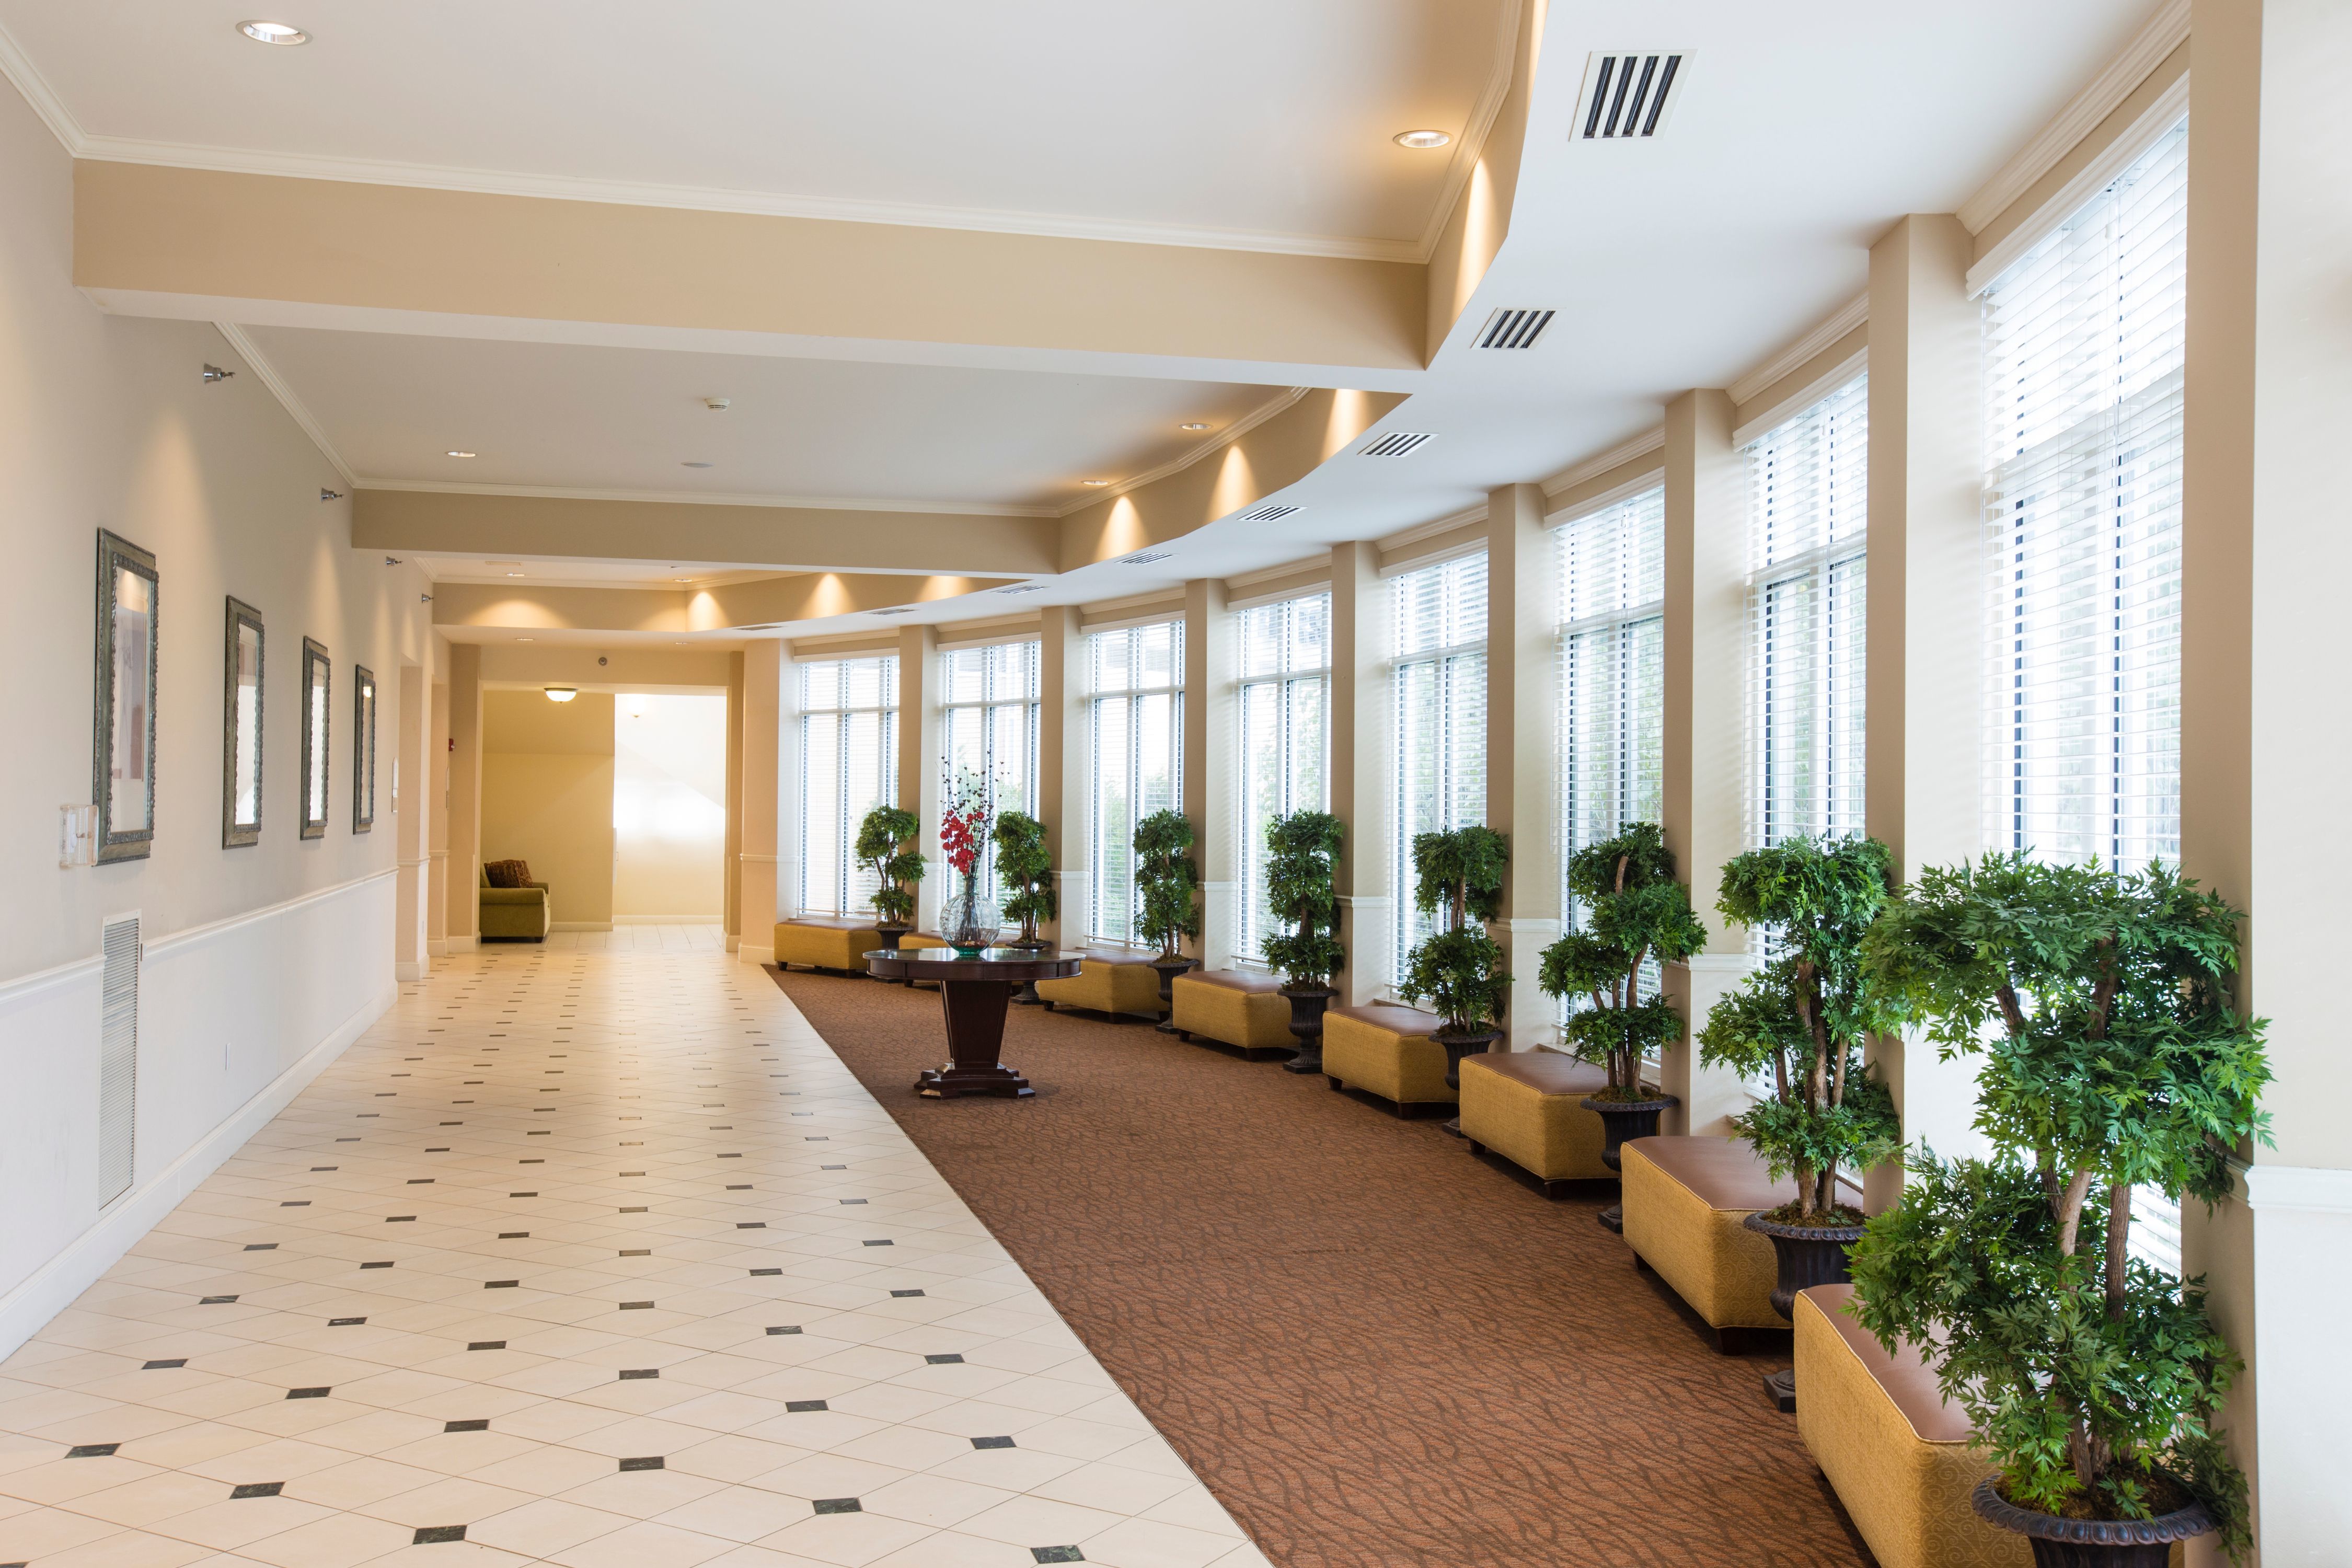 Banquet Hallway with Plants and Windows